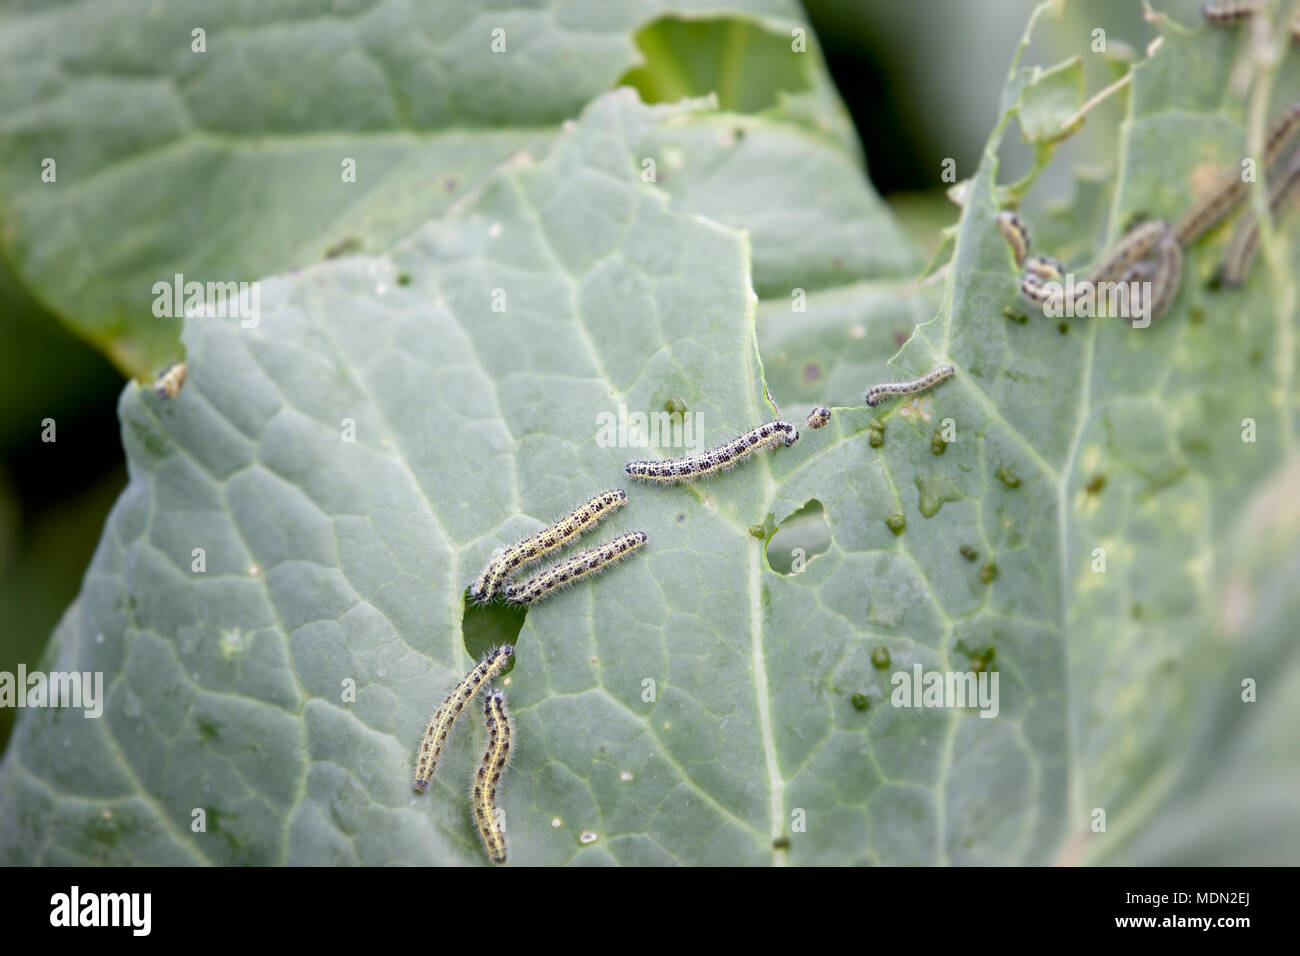 wholes on cabbage leaves cut by many green worms in the garden Stock Photo  - Alamy